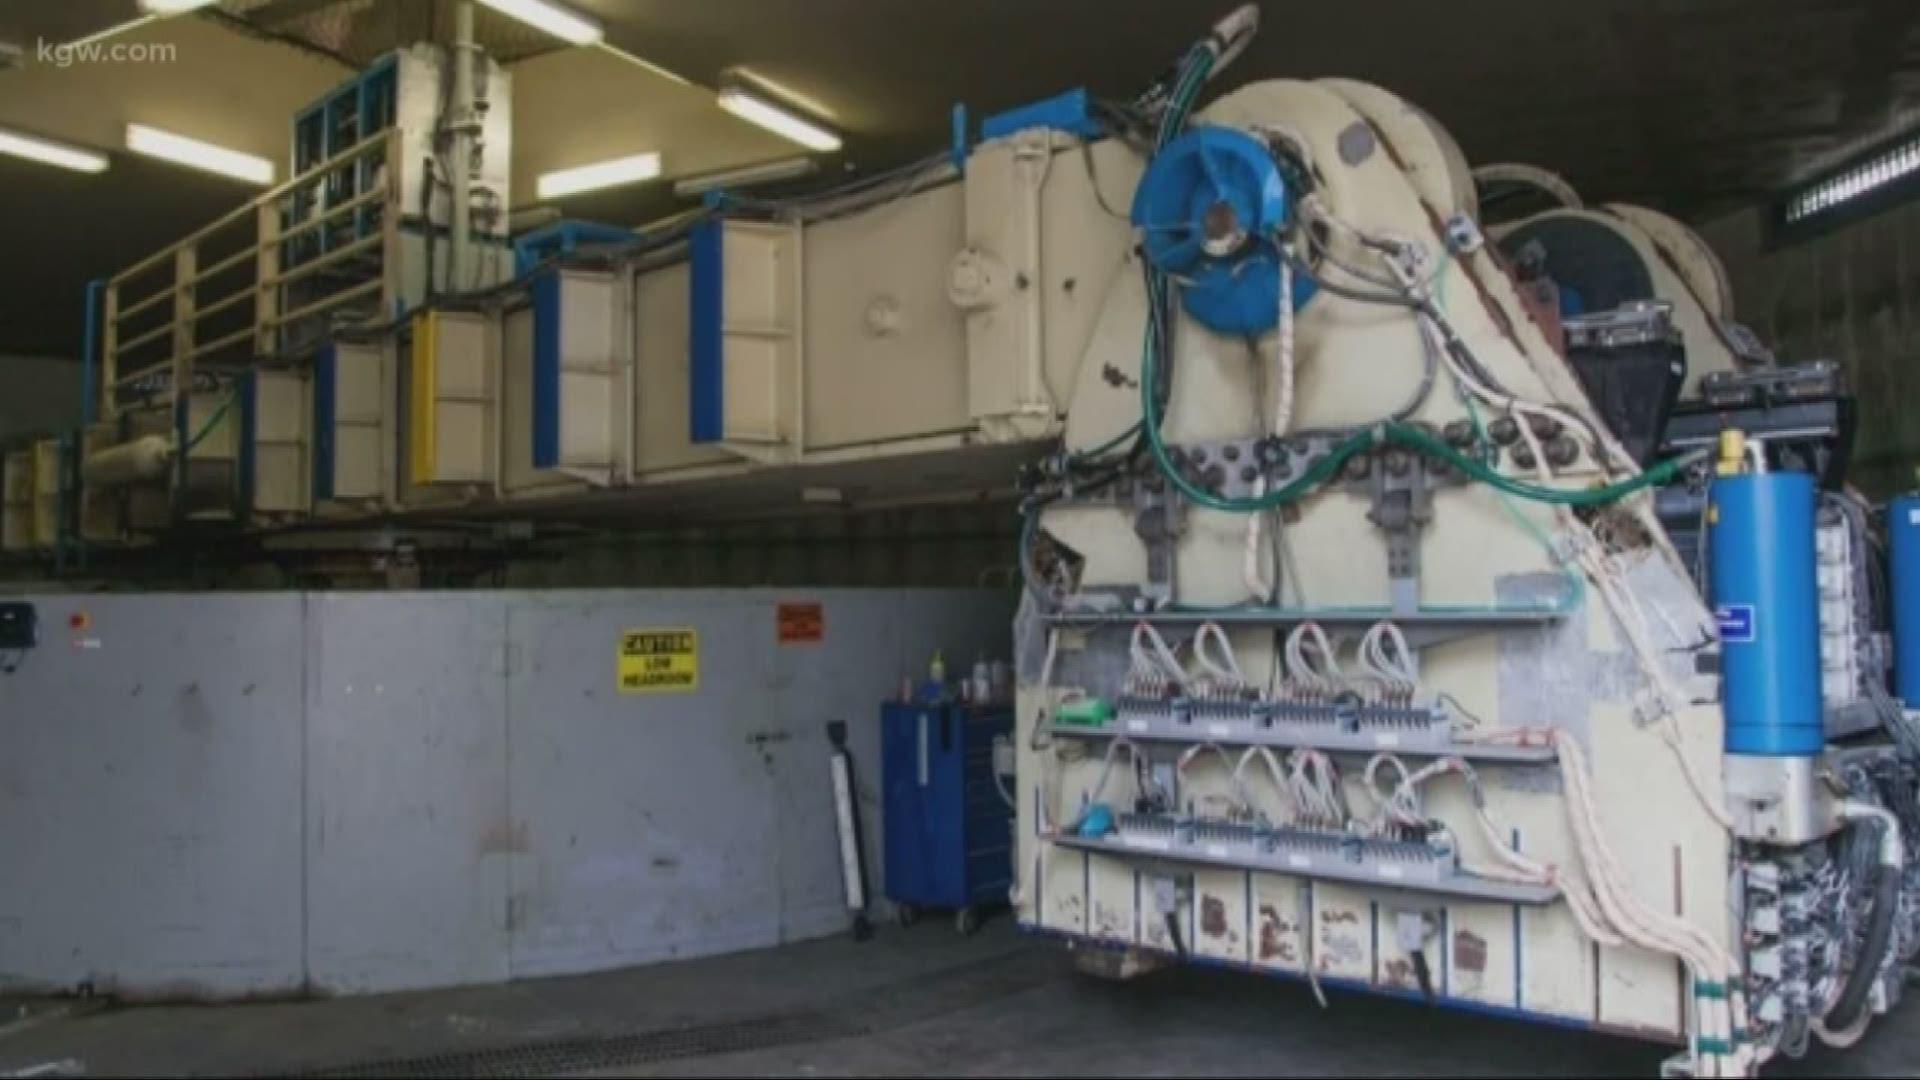 There’s more great work being done at Oregon State University. An old piece of NASA technology is getting some more use over on the Oregon and Washington coasts. We’re talking about those old centrifuges that used to spin astronauts around and test gravitational force on them. One of those centrifuges is now helping OSU researchers better understand our tsunami risk.